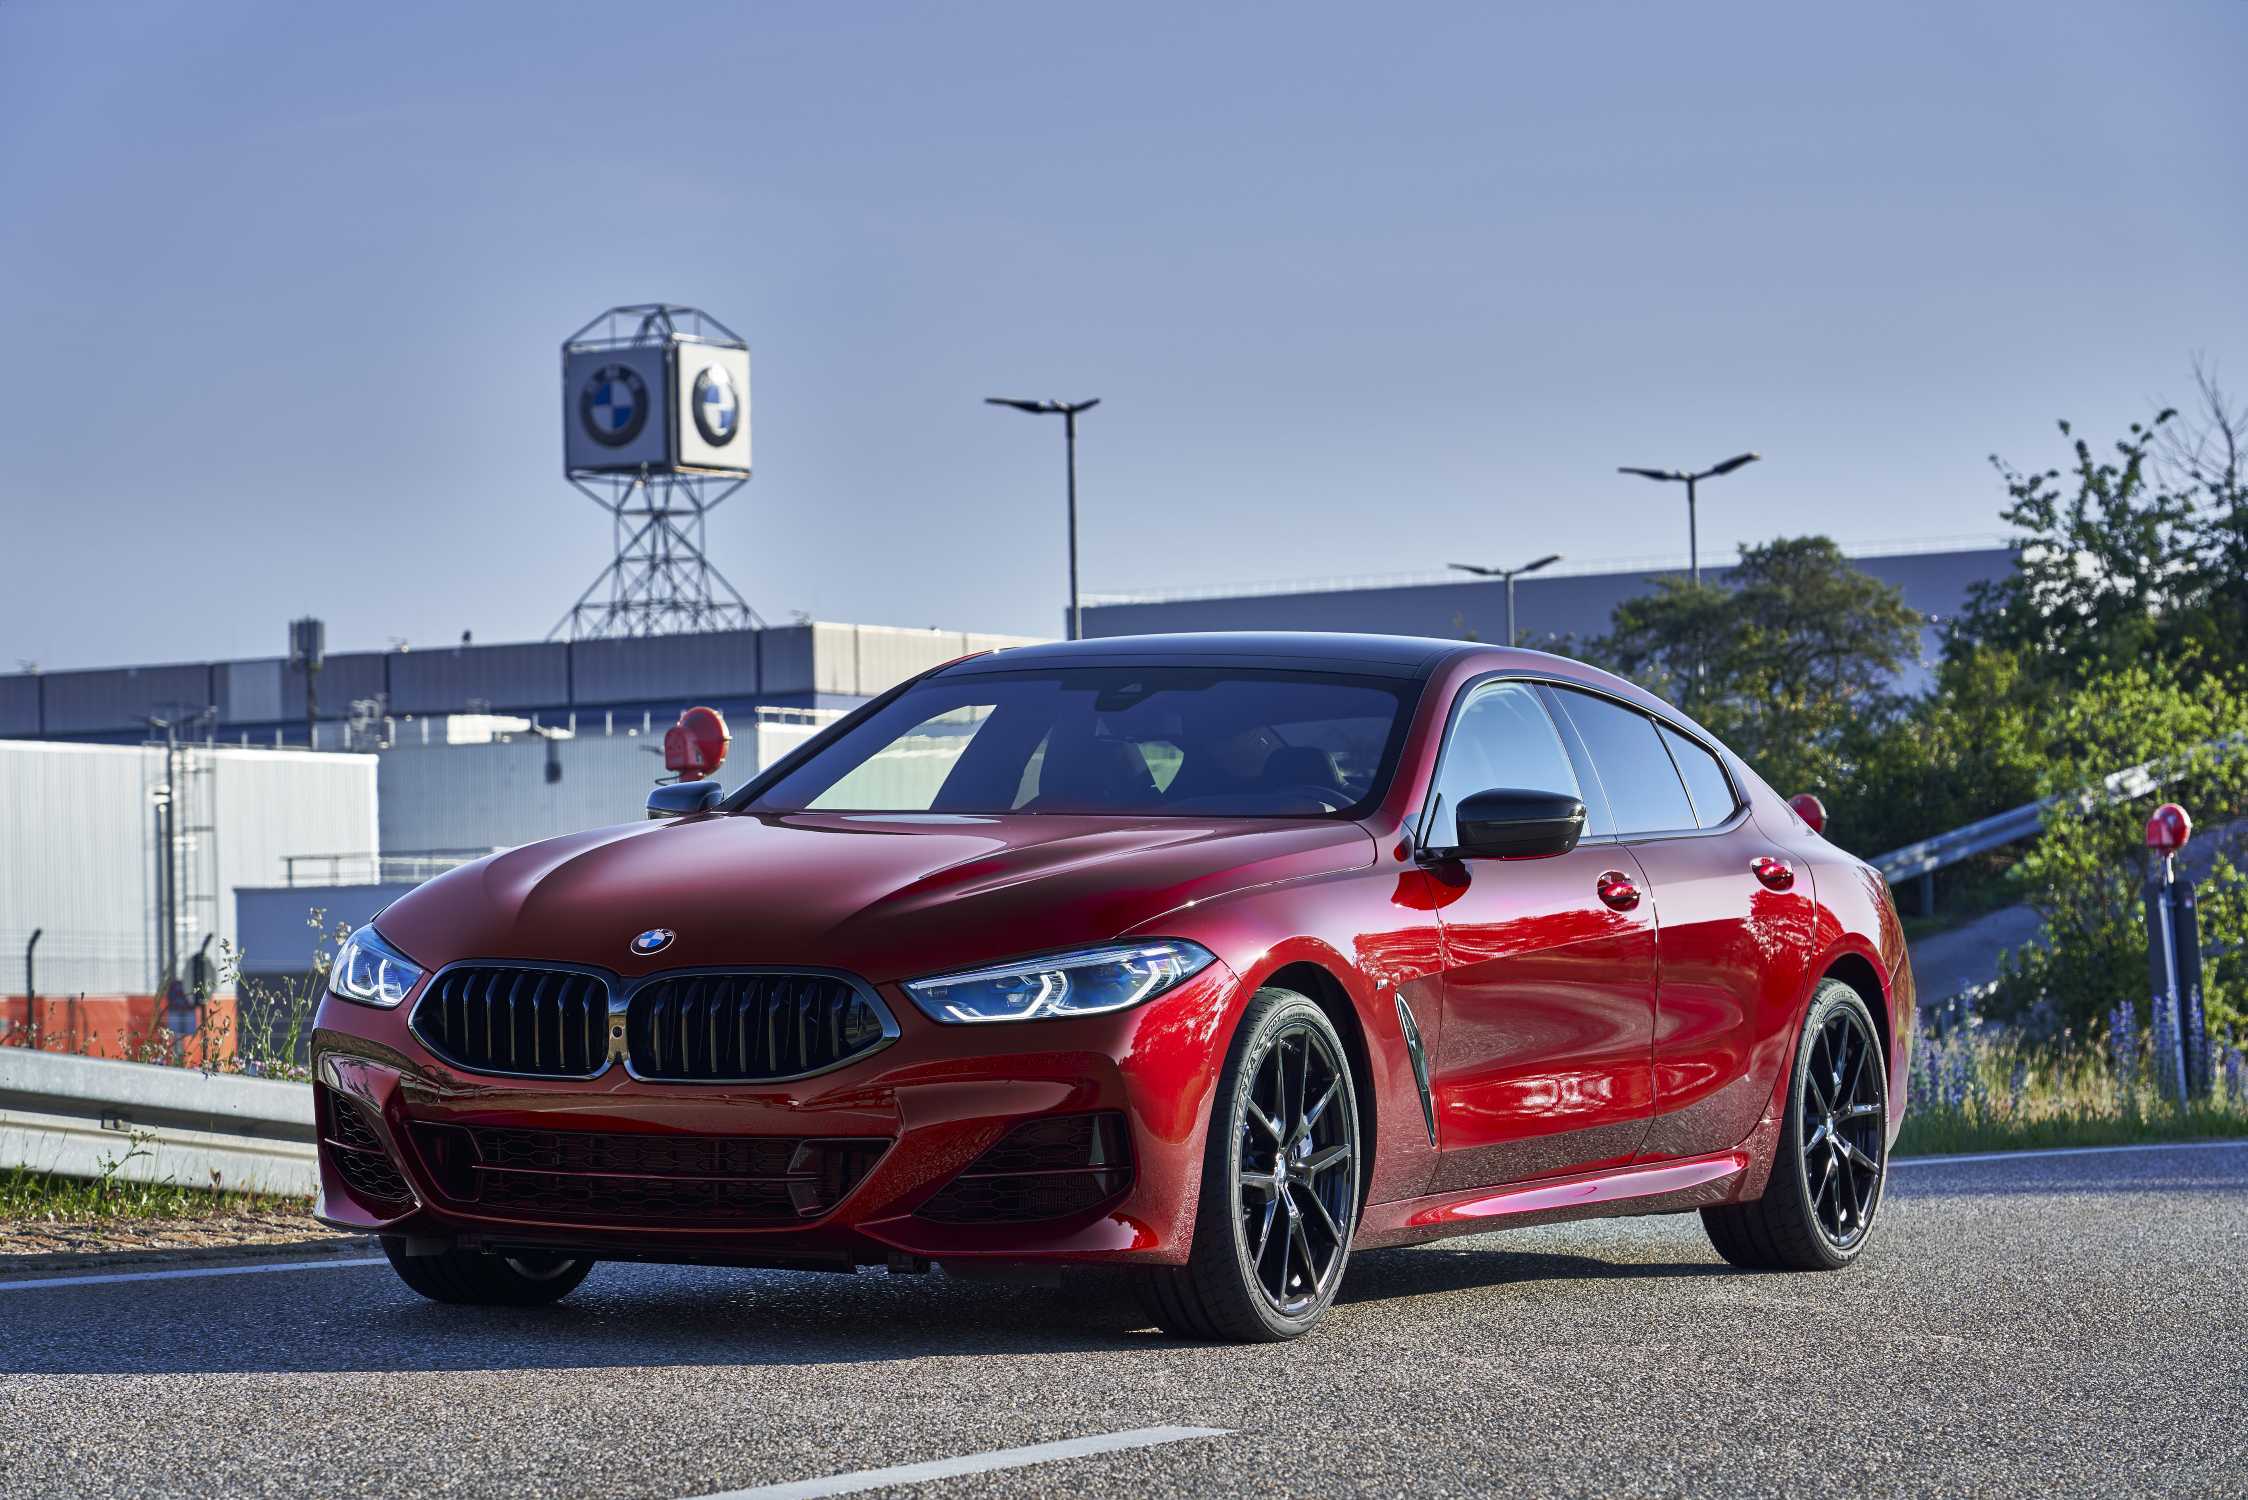 The new BMW 8 Series Gran Coupé on the break-in course at BMW Group Plant Dingolfing (07/2019)